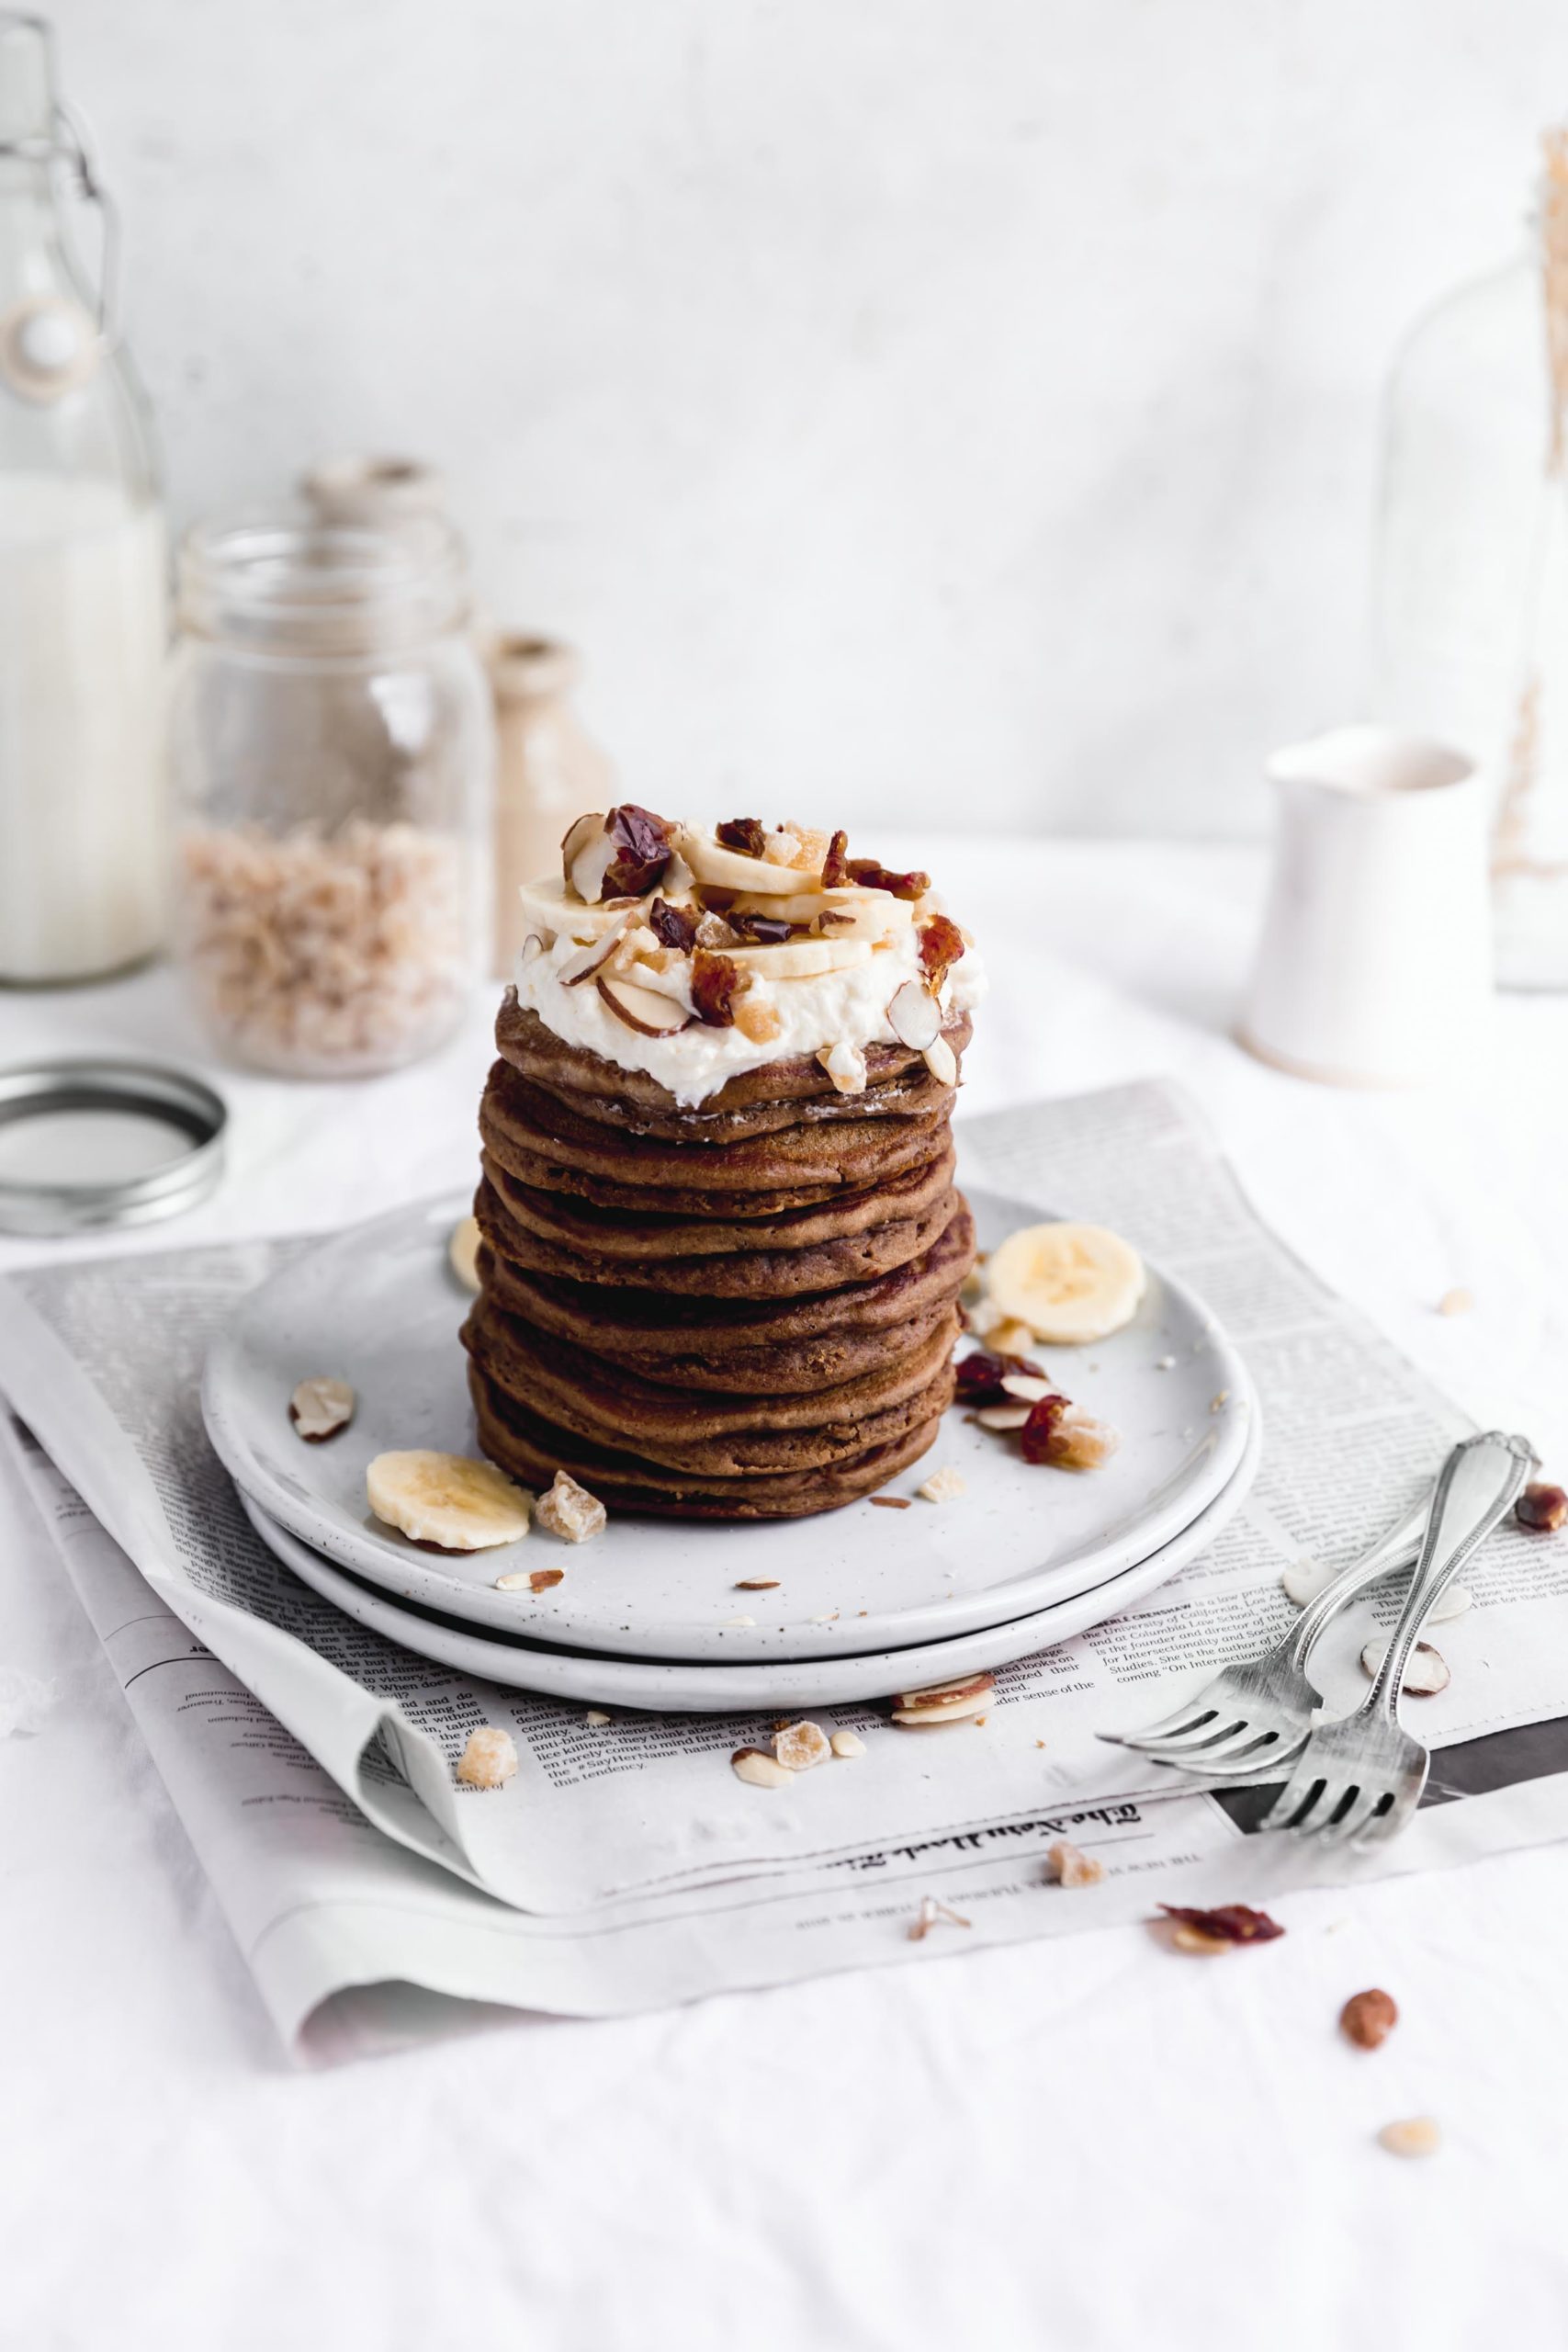 Start your Christmas morning off right with a fat stack of these fluffy gingerbread pancakes. Topped with a healthy pour of maple syrup, these pancakes are perfect for the holidays!